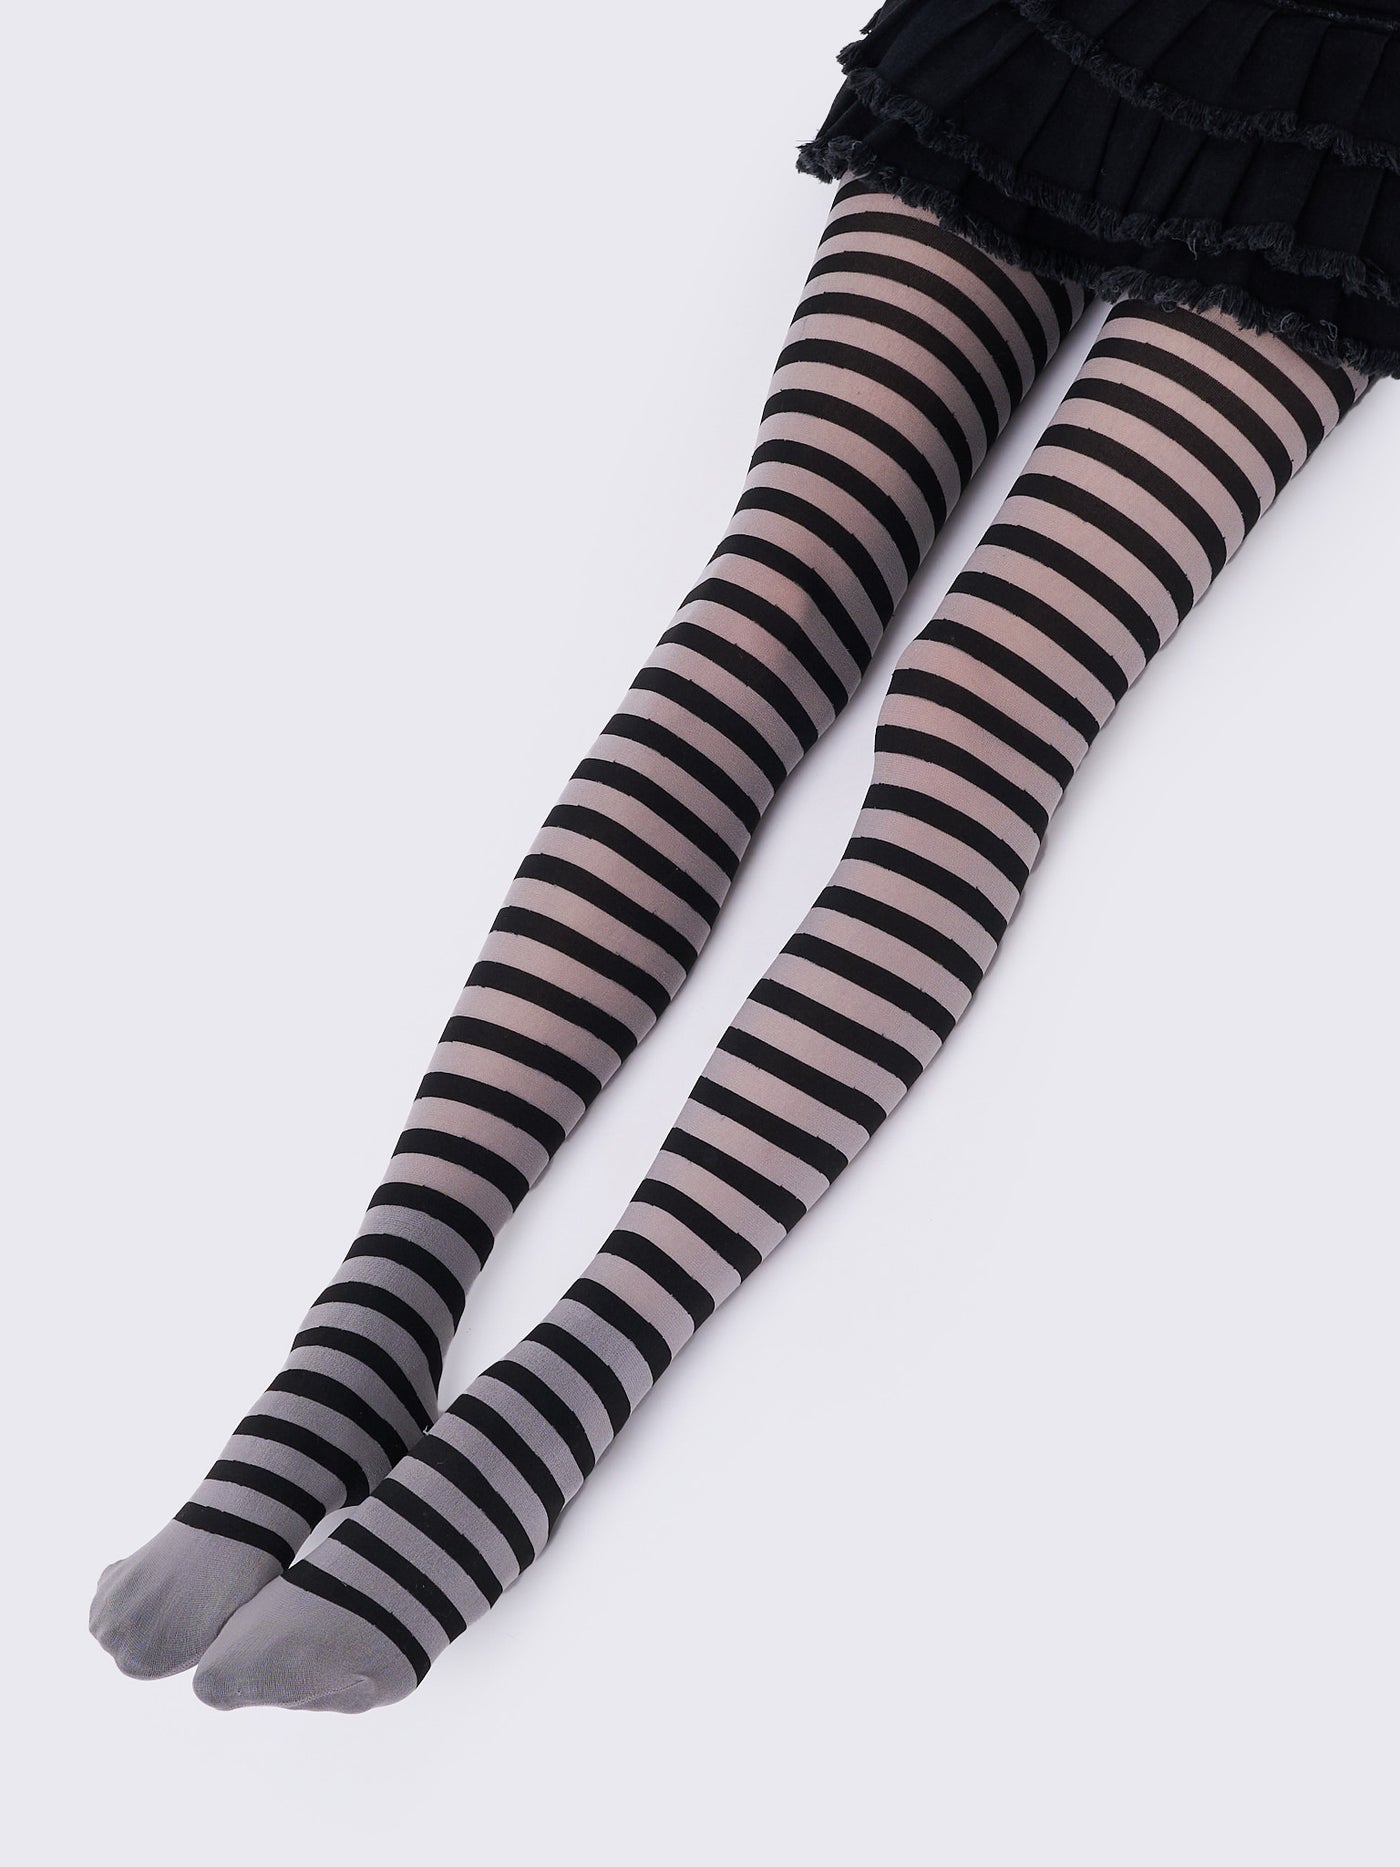 Grey and Black Striped Tights